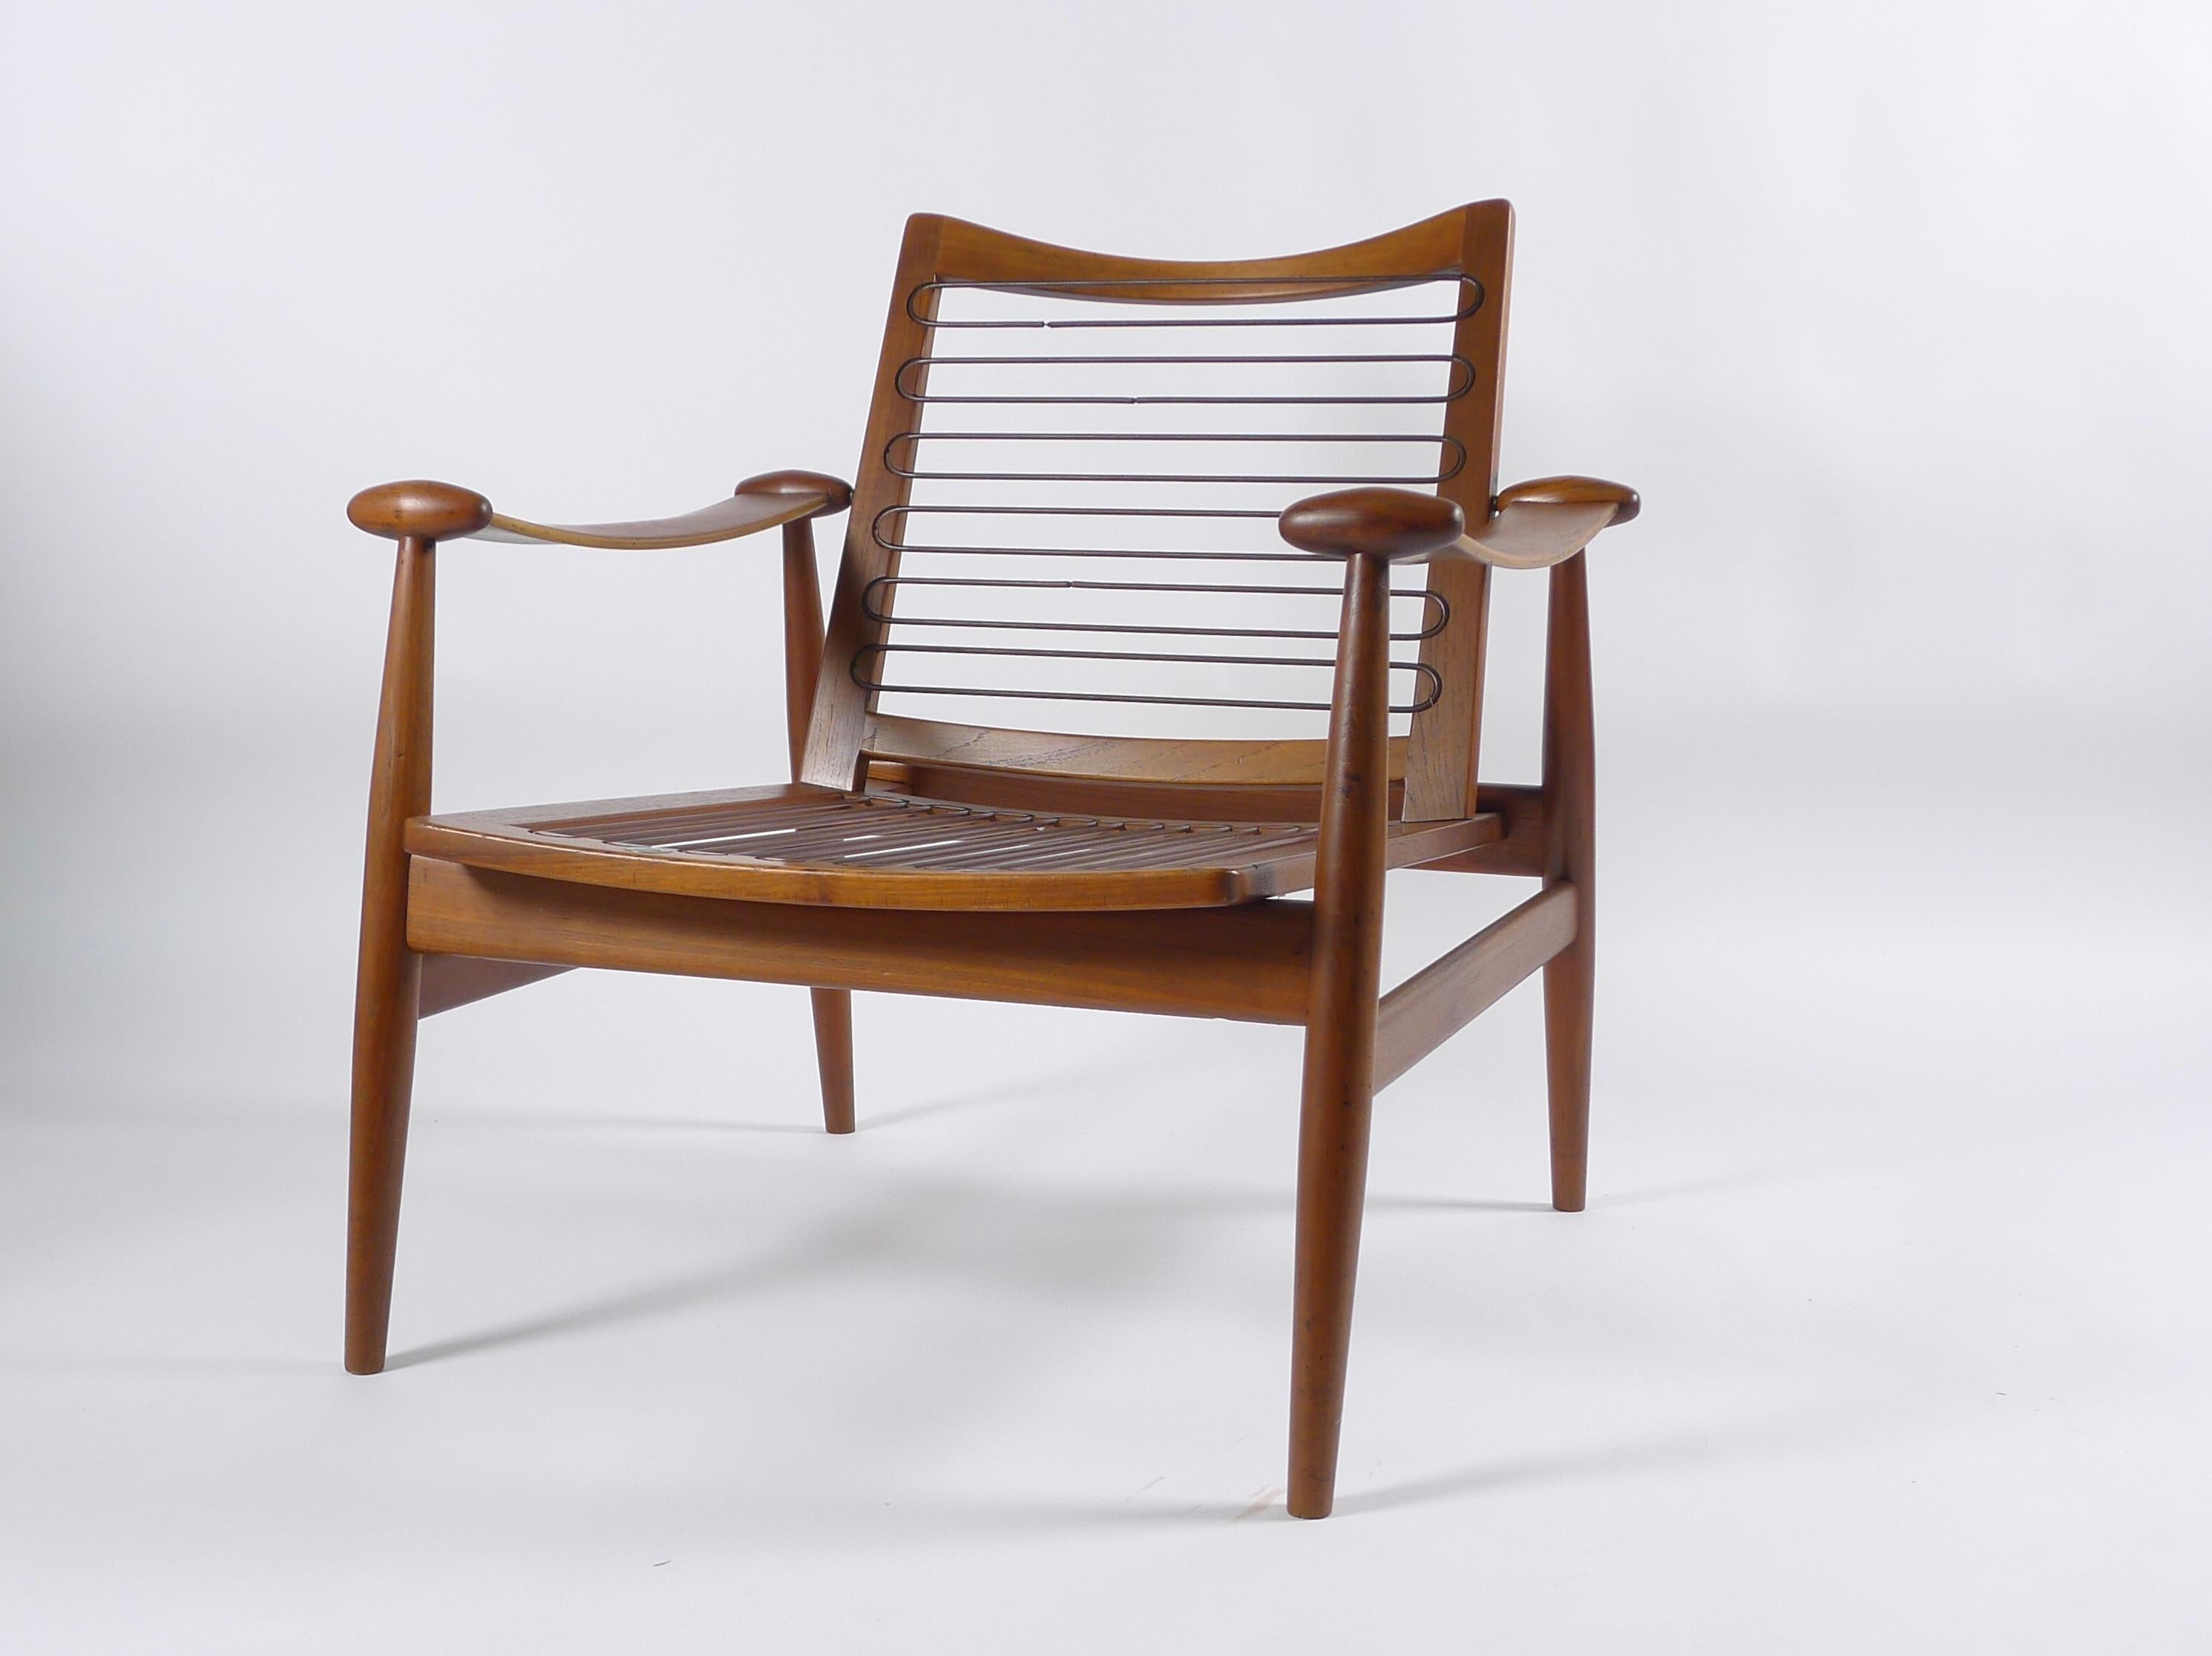 Finn Juhl Spade Chair, Model Fd133, 1950s, Produced by France & Son, with Label 4